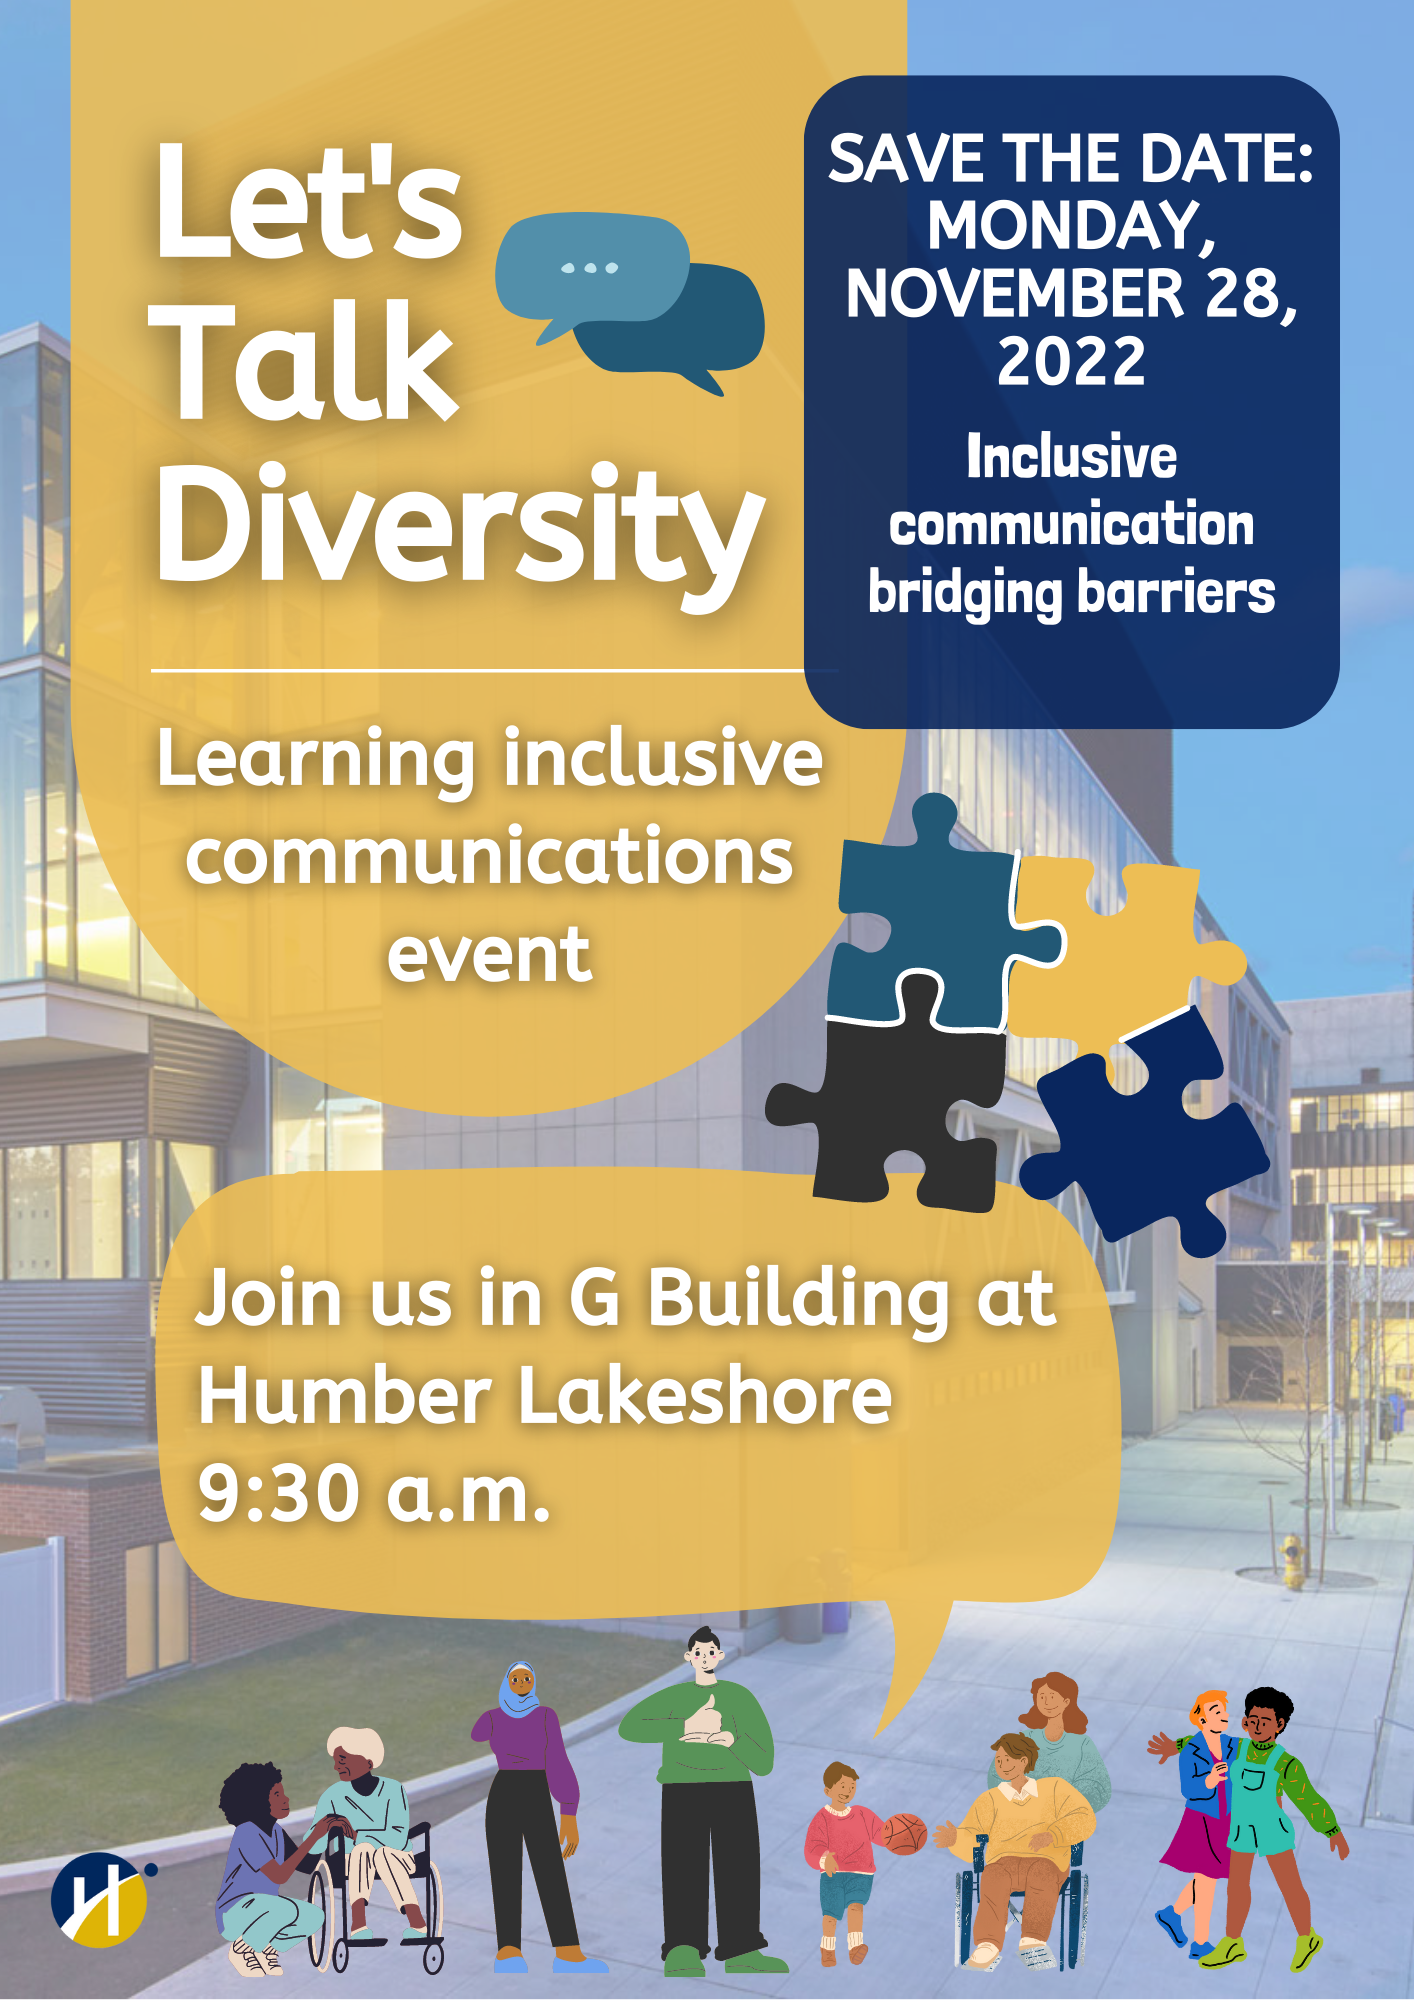 Save the date: Monday, November 28, 2022 for an event at Humber Lakeshore G building called 'Let's talk diversity'